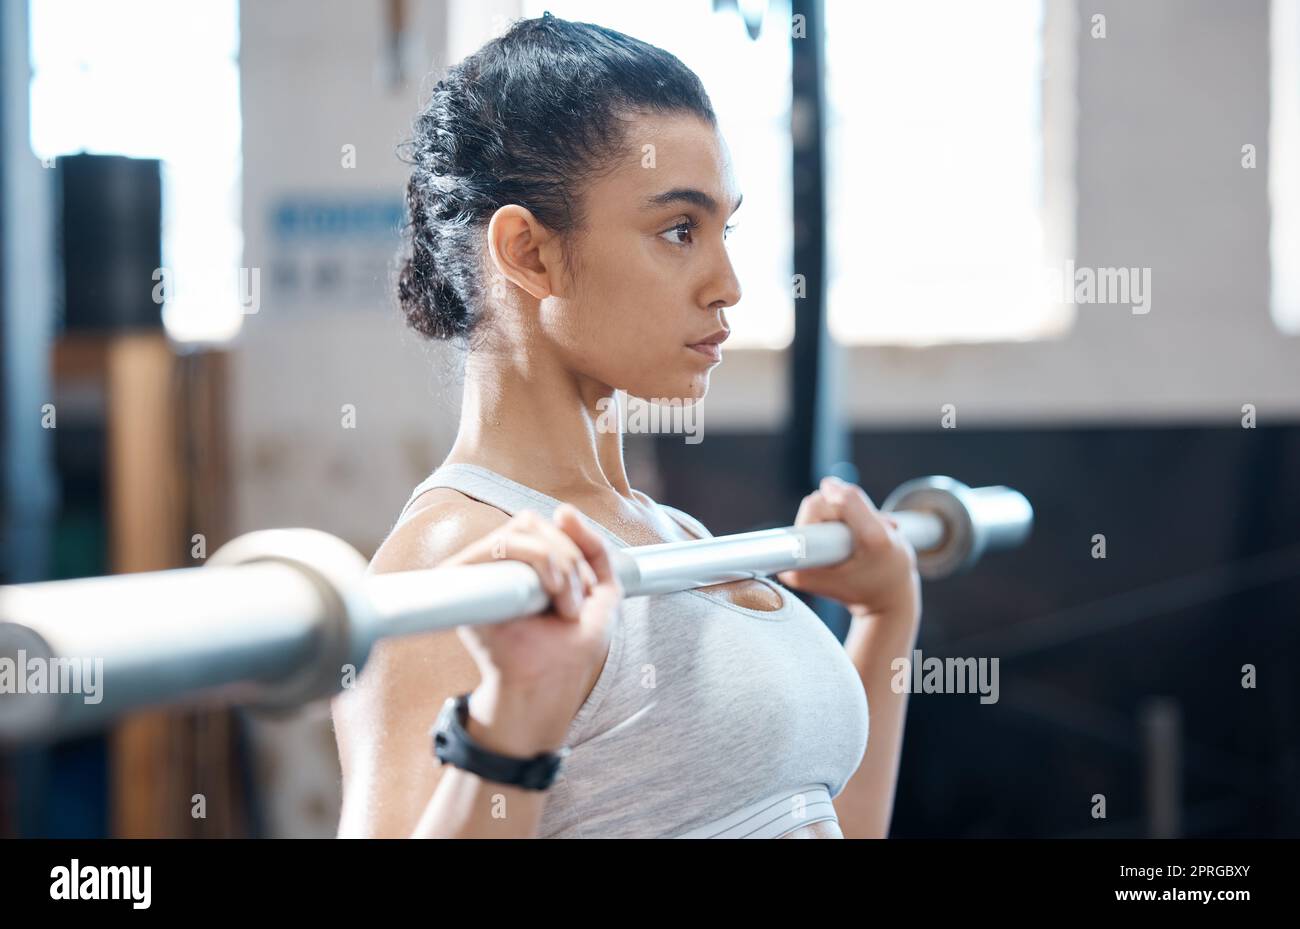 Weight lifting, woman fitness and exercise workout of a bodybuilder with sports motivation and focus. Sport and strength training of a Mexican athlete working out in a wellness, health and gym studio Stock Photo